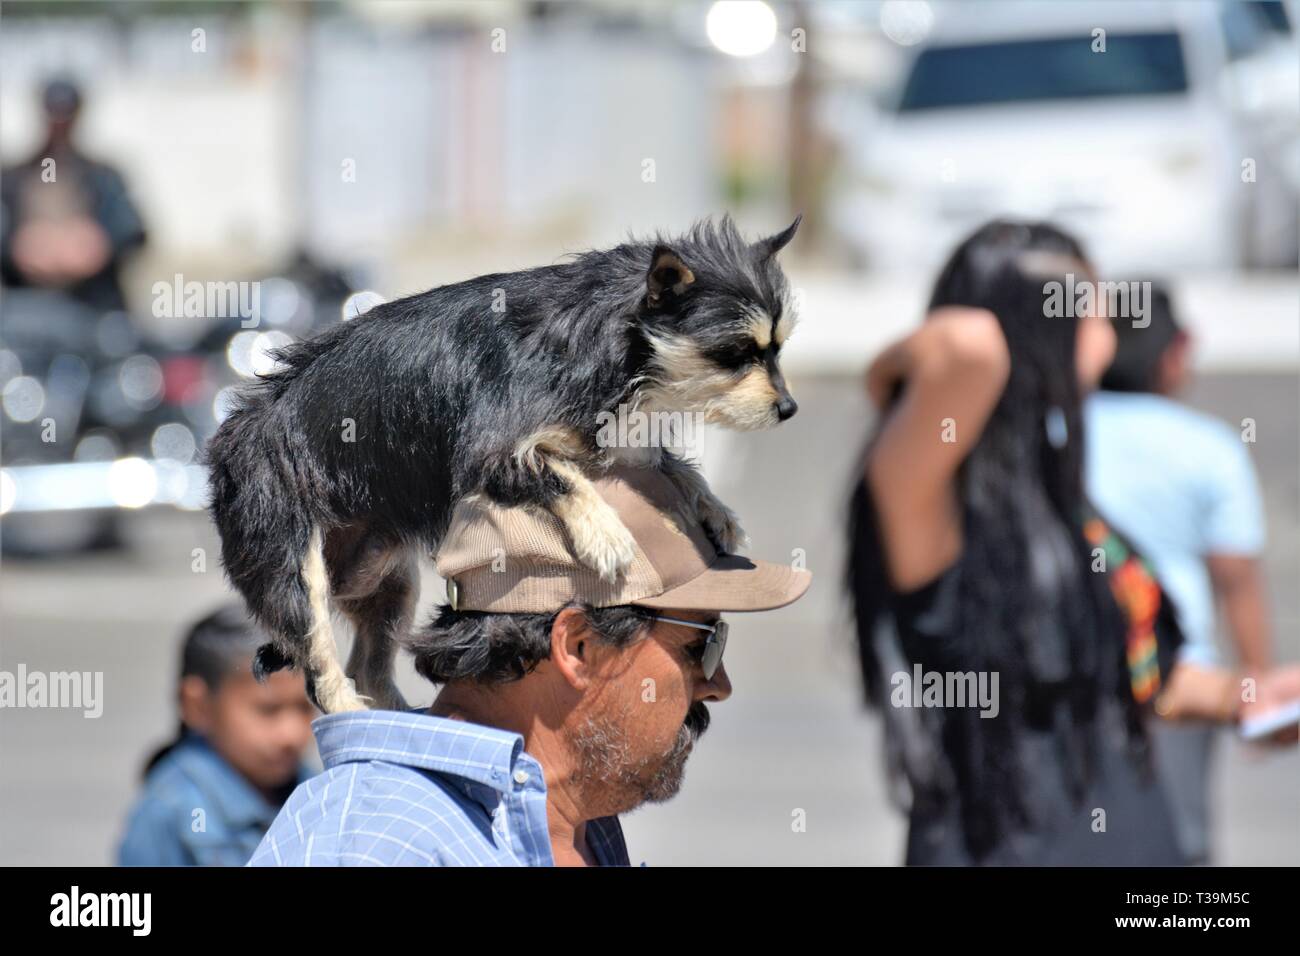 Hispanic adult Mexican with his real dog ridding on his had in public taking a daily walk together at summer fair in Santa Maria California USA Stock Photo